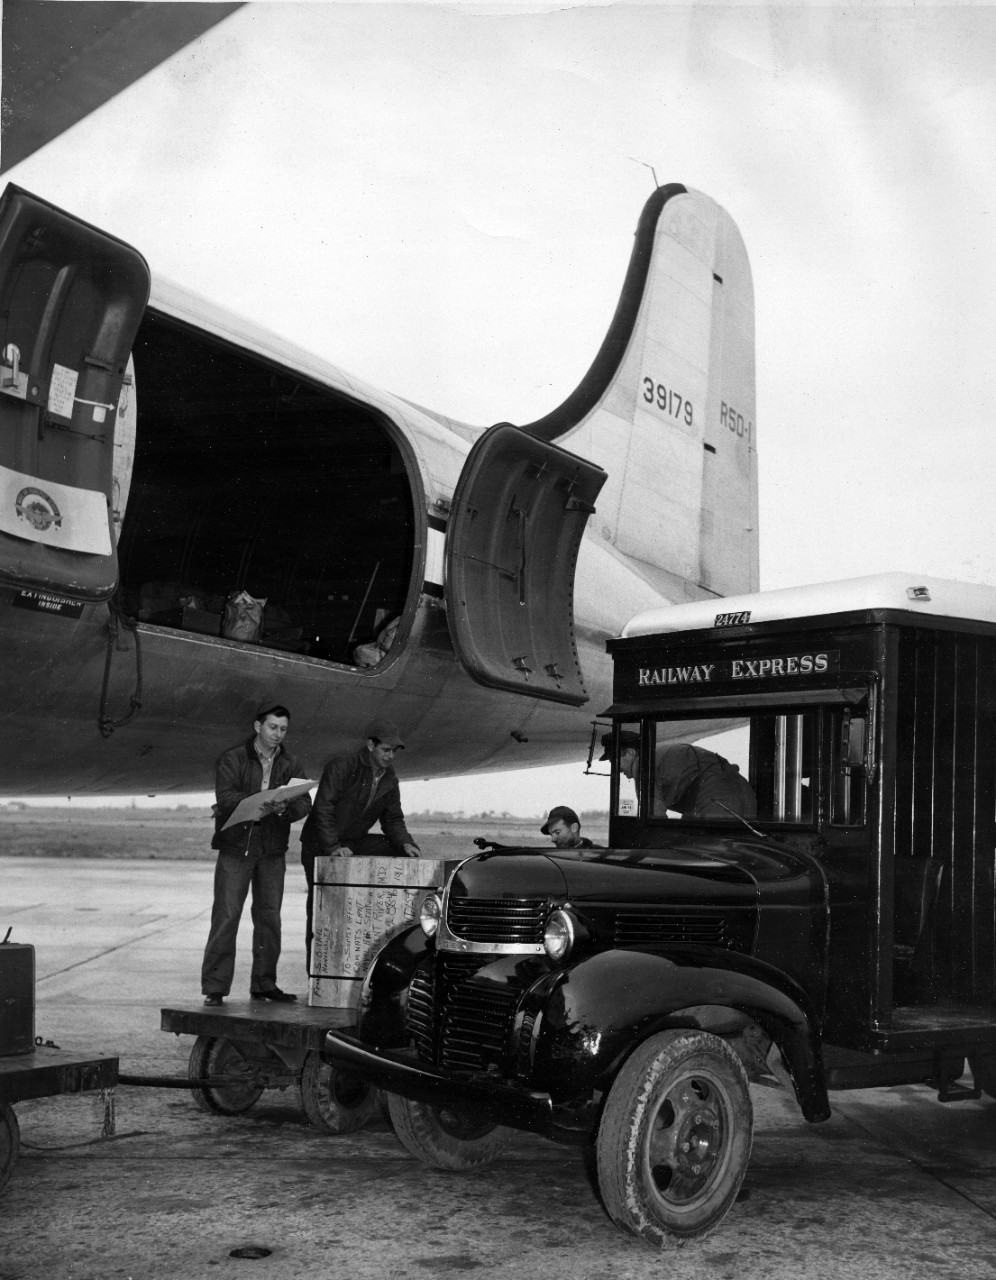 Loading cargo on to a Naval Air Transport Service (NATS) aircraft from a Railway Express vehicle. The crate being loaded is from Honolulu, HI to Naval Air Station Patuxent River, MD, circa 1944. 